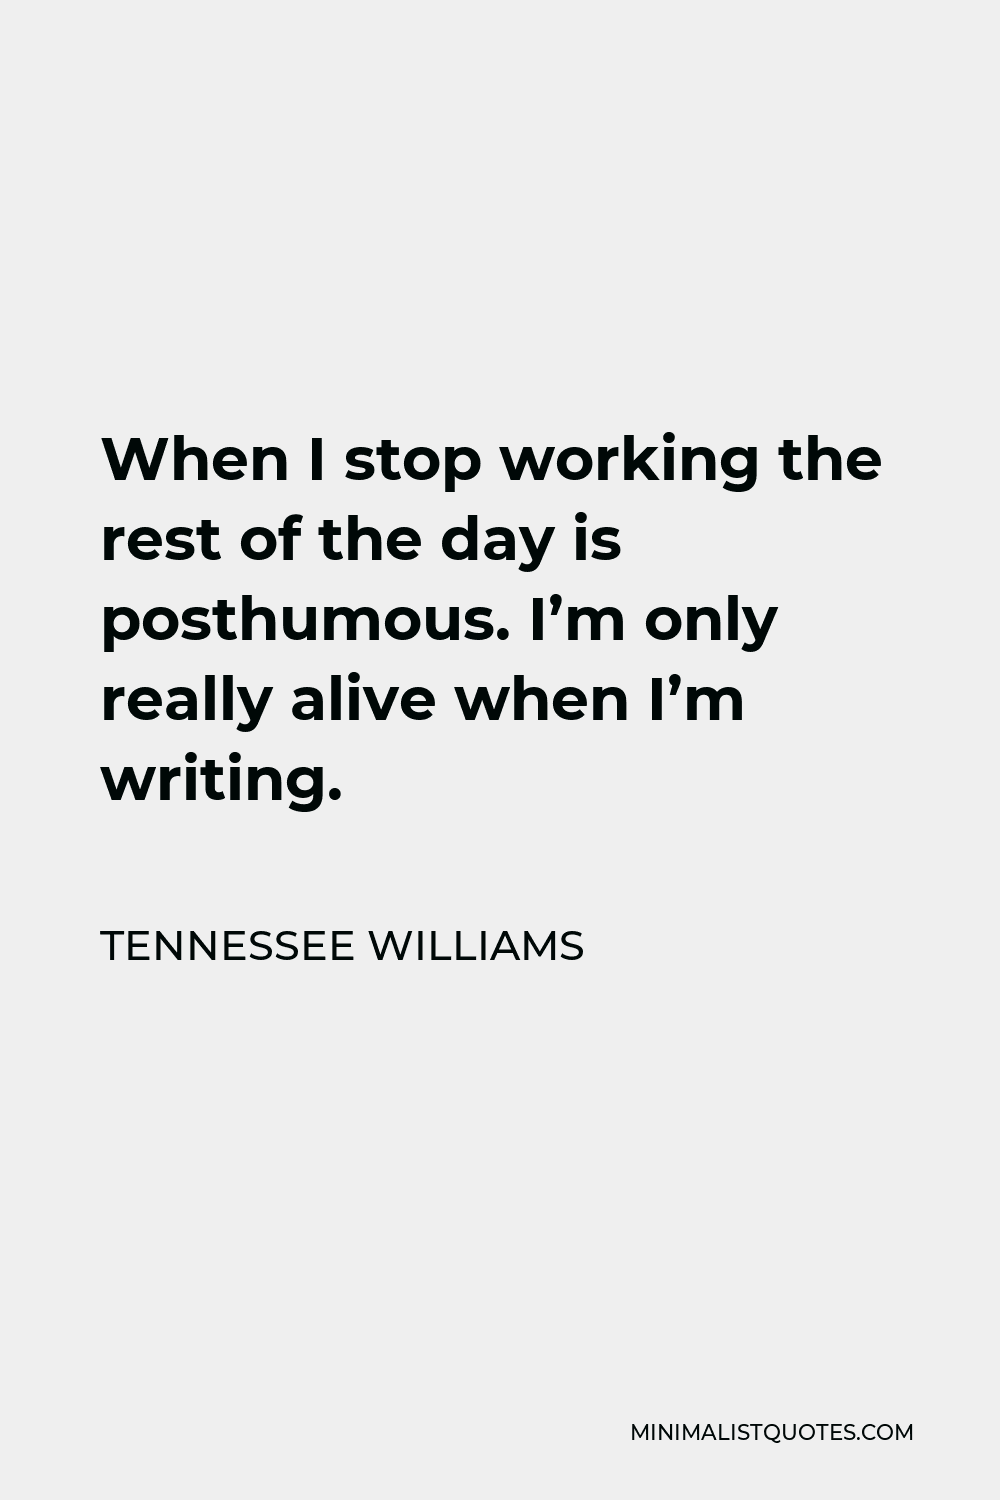 Tennessee Williams Quote - When I stop working the rest of the day is posthumous. I’m only really alive when I’m writing.